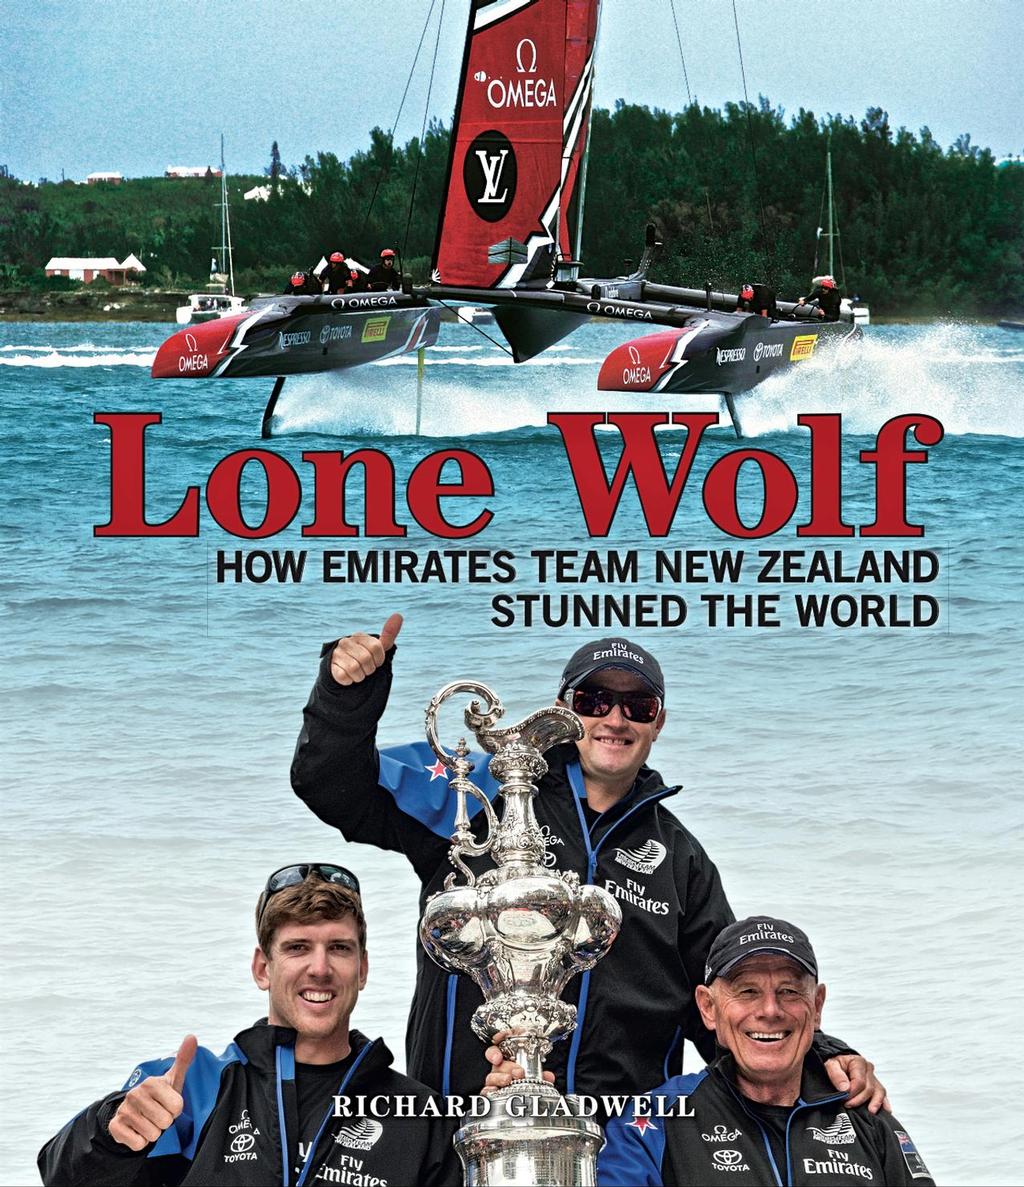 Lone Wolf - How Emirates Team New Zealand stunned the World 
ISBN: 978-1-988516-09-7

Format: Softback - 250 x 210mm (portrait), colour throughout, 208pp photo copyright Richard Gladwell www.photosport.co.nz taken at  and featuring the  class